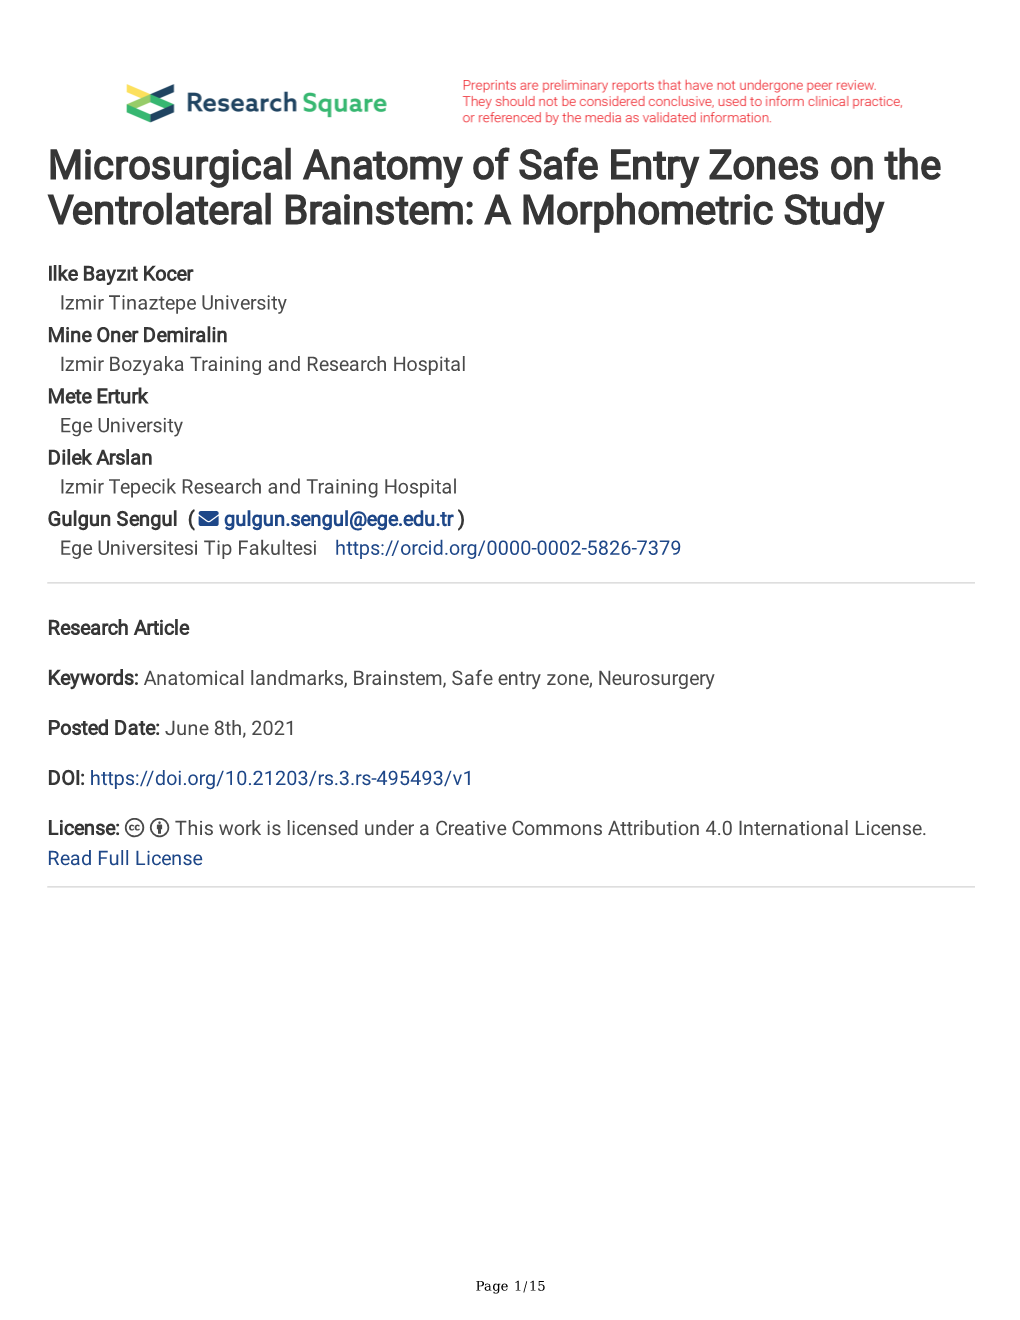 Microsurgical Anatomy of Safe Entry Zones on the Ventrolateral Brainstem: a Morphometric Study